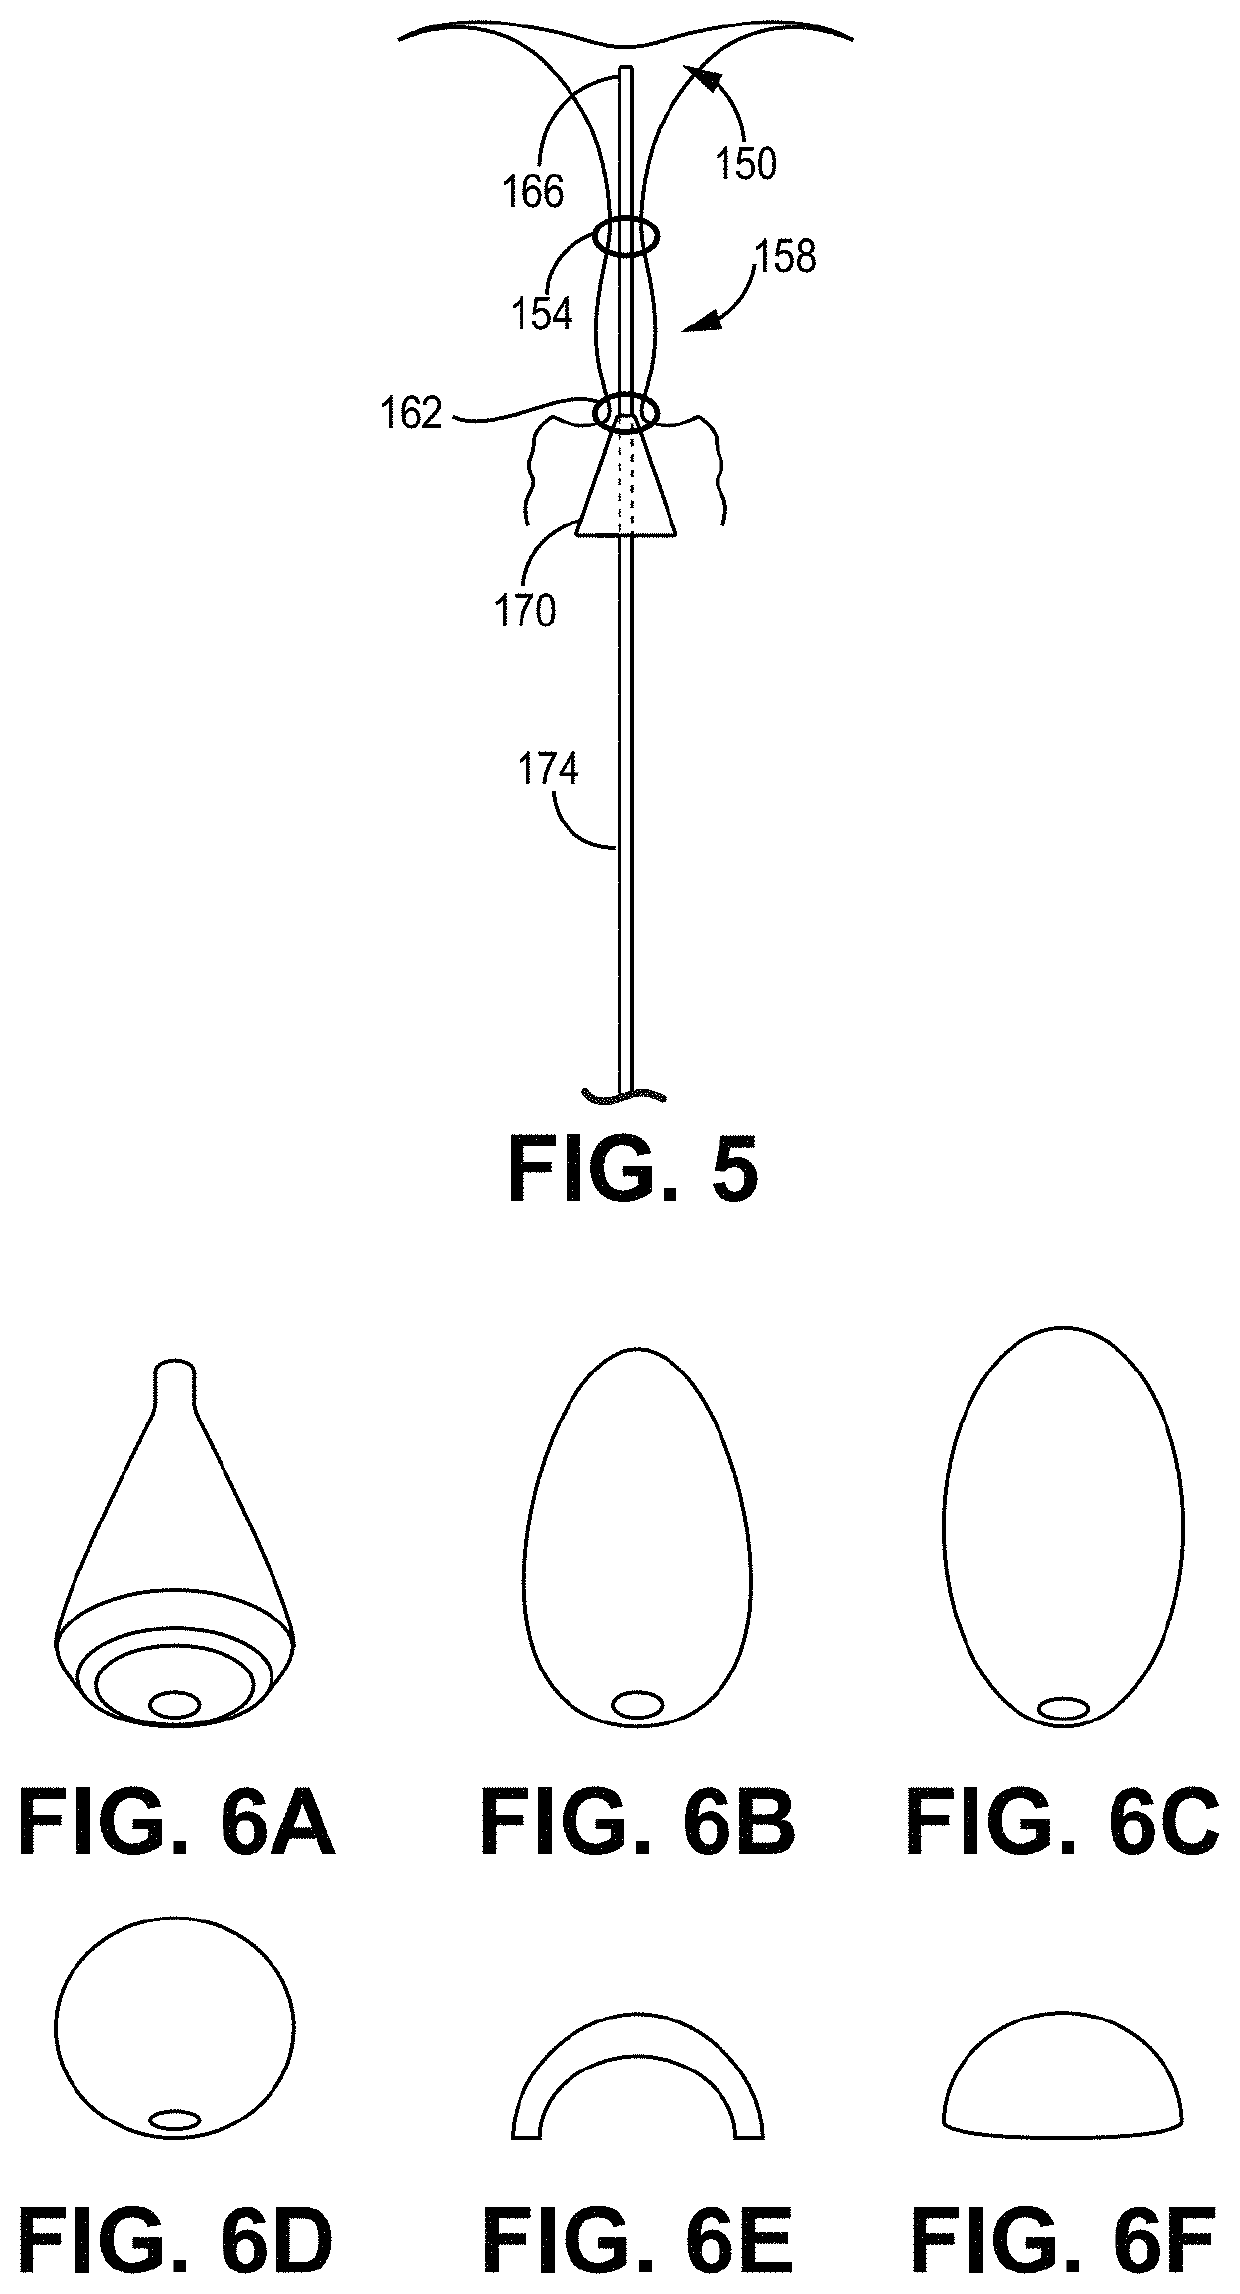 Transcervical access systems for intrauterine fluid exchange, such as placement of hydrogels formed in situ